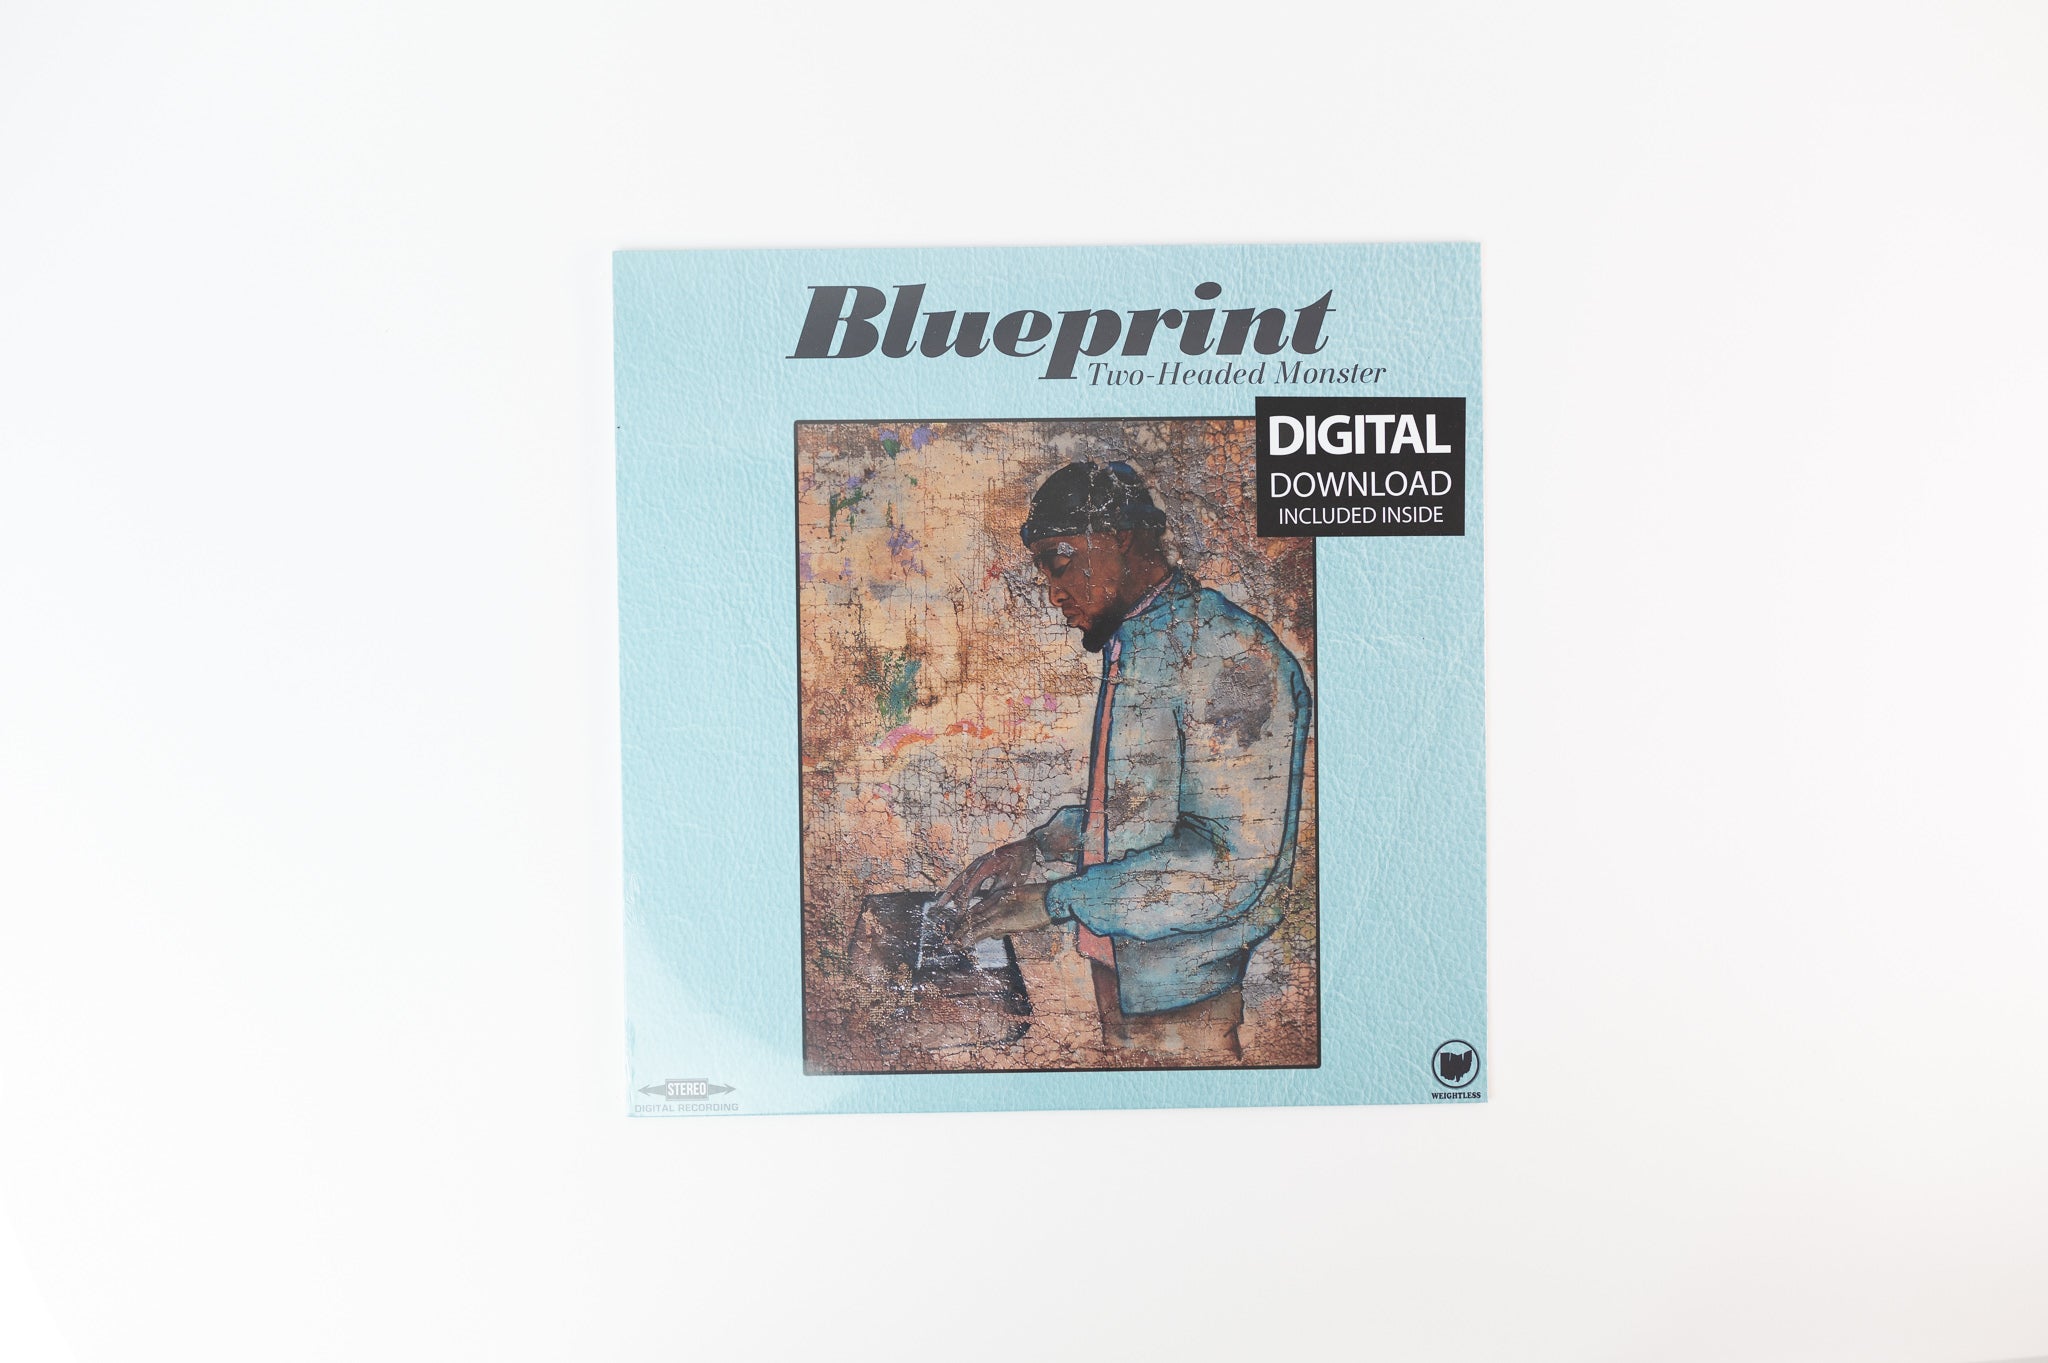 Blueprint - Two-Headed Monster on Weightless Clear Vinyl Reissue Sealed